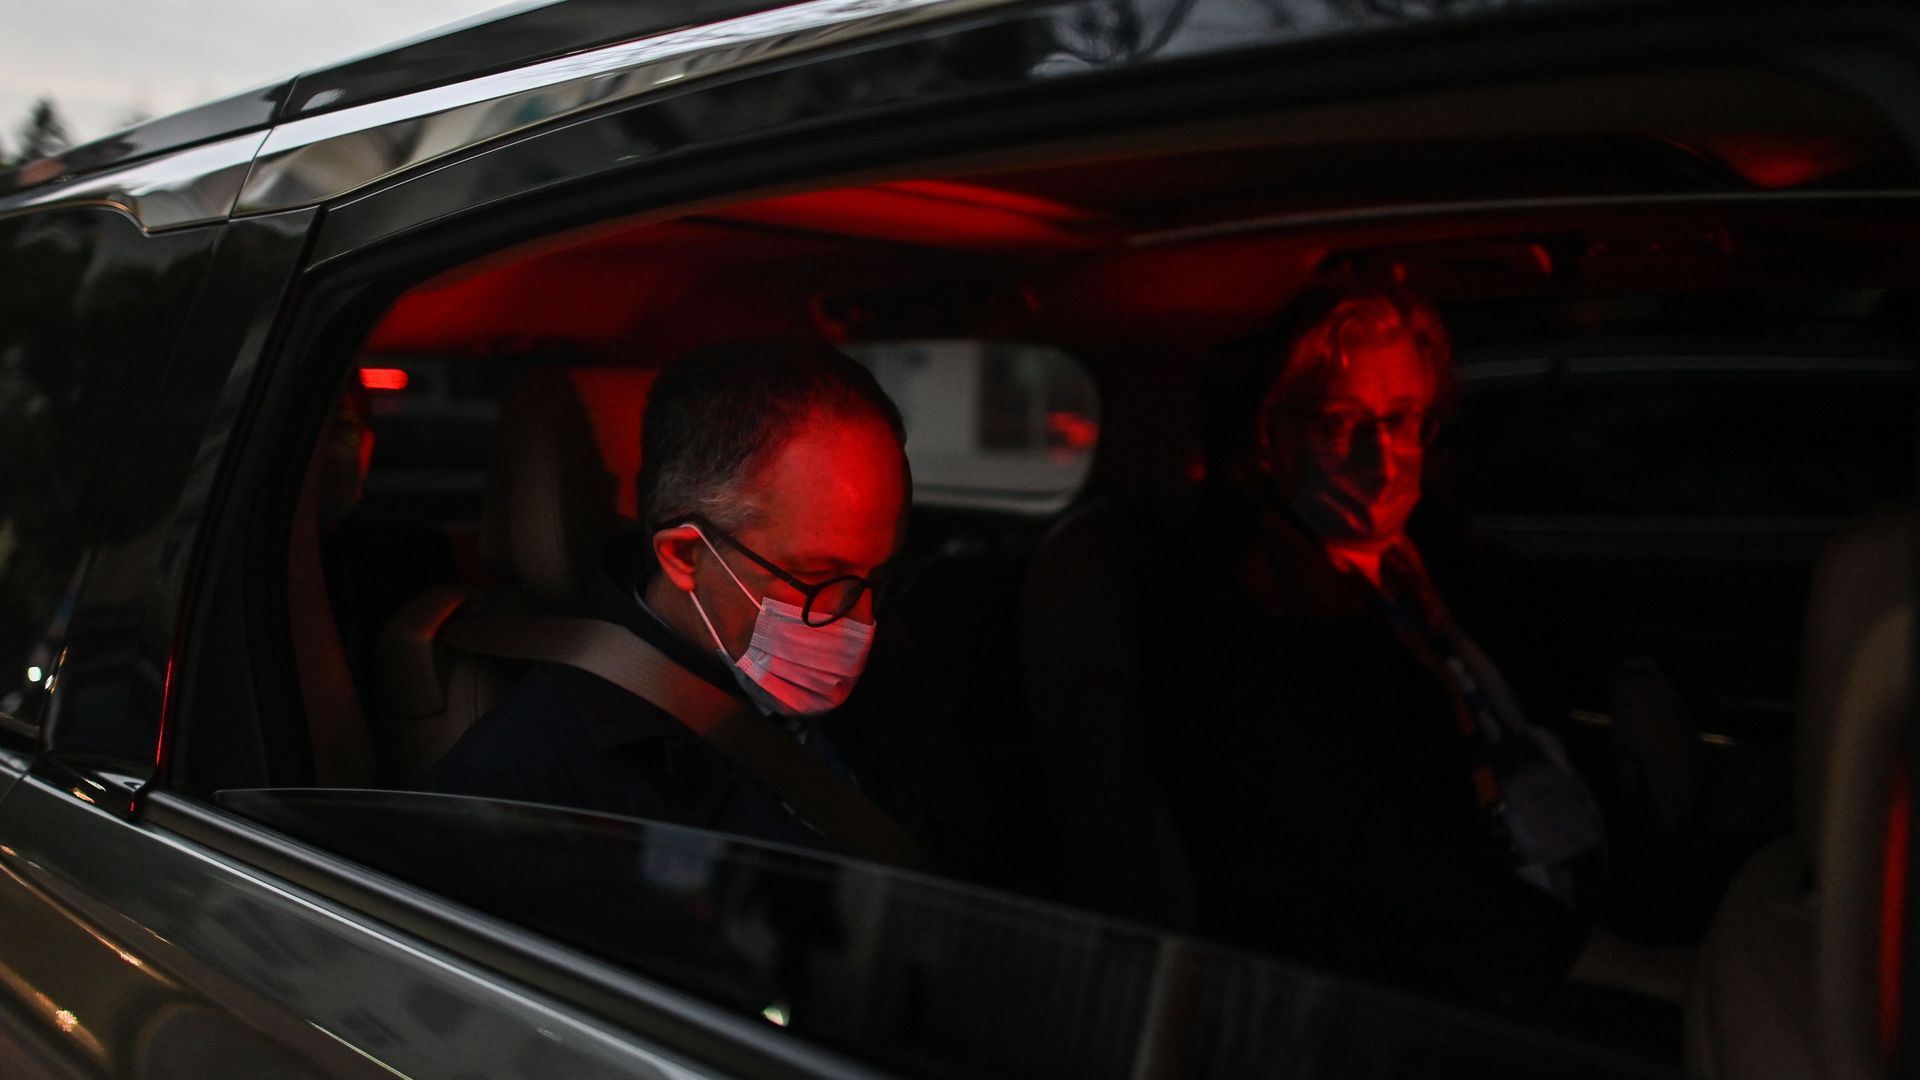 Picture taken from the side of a car with its windows down, two men sit inside of the car, they are two of the members of the WHO team investigating the origin of the coronavirus